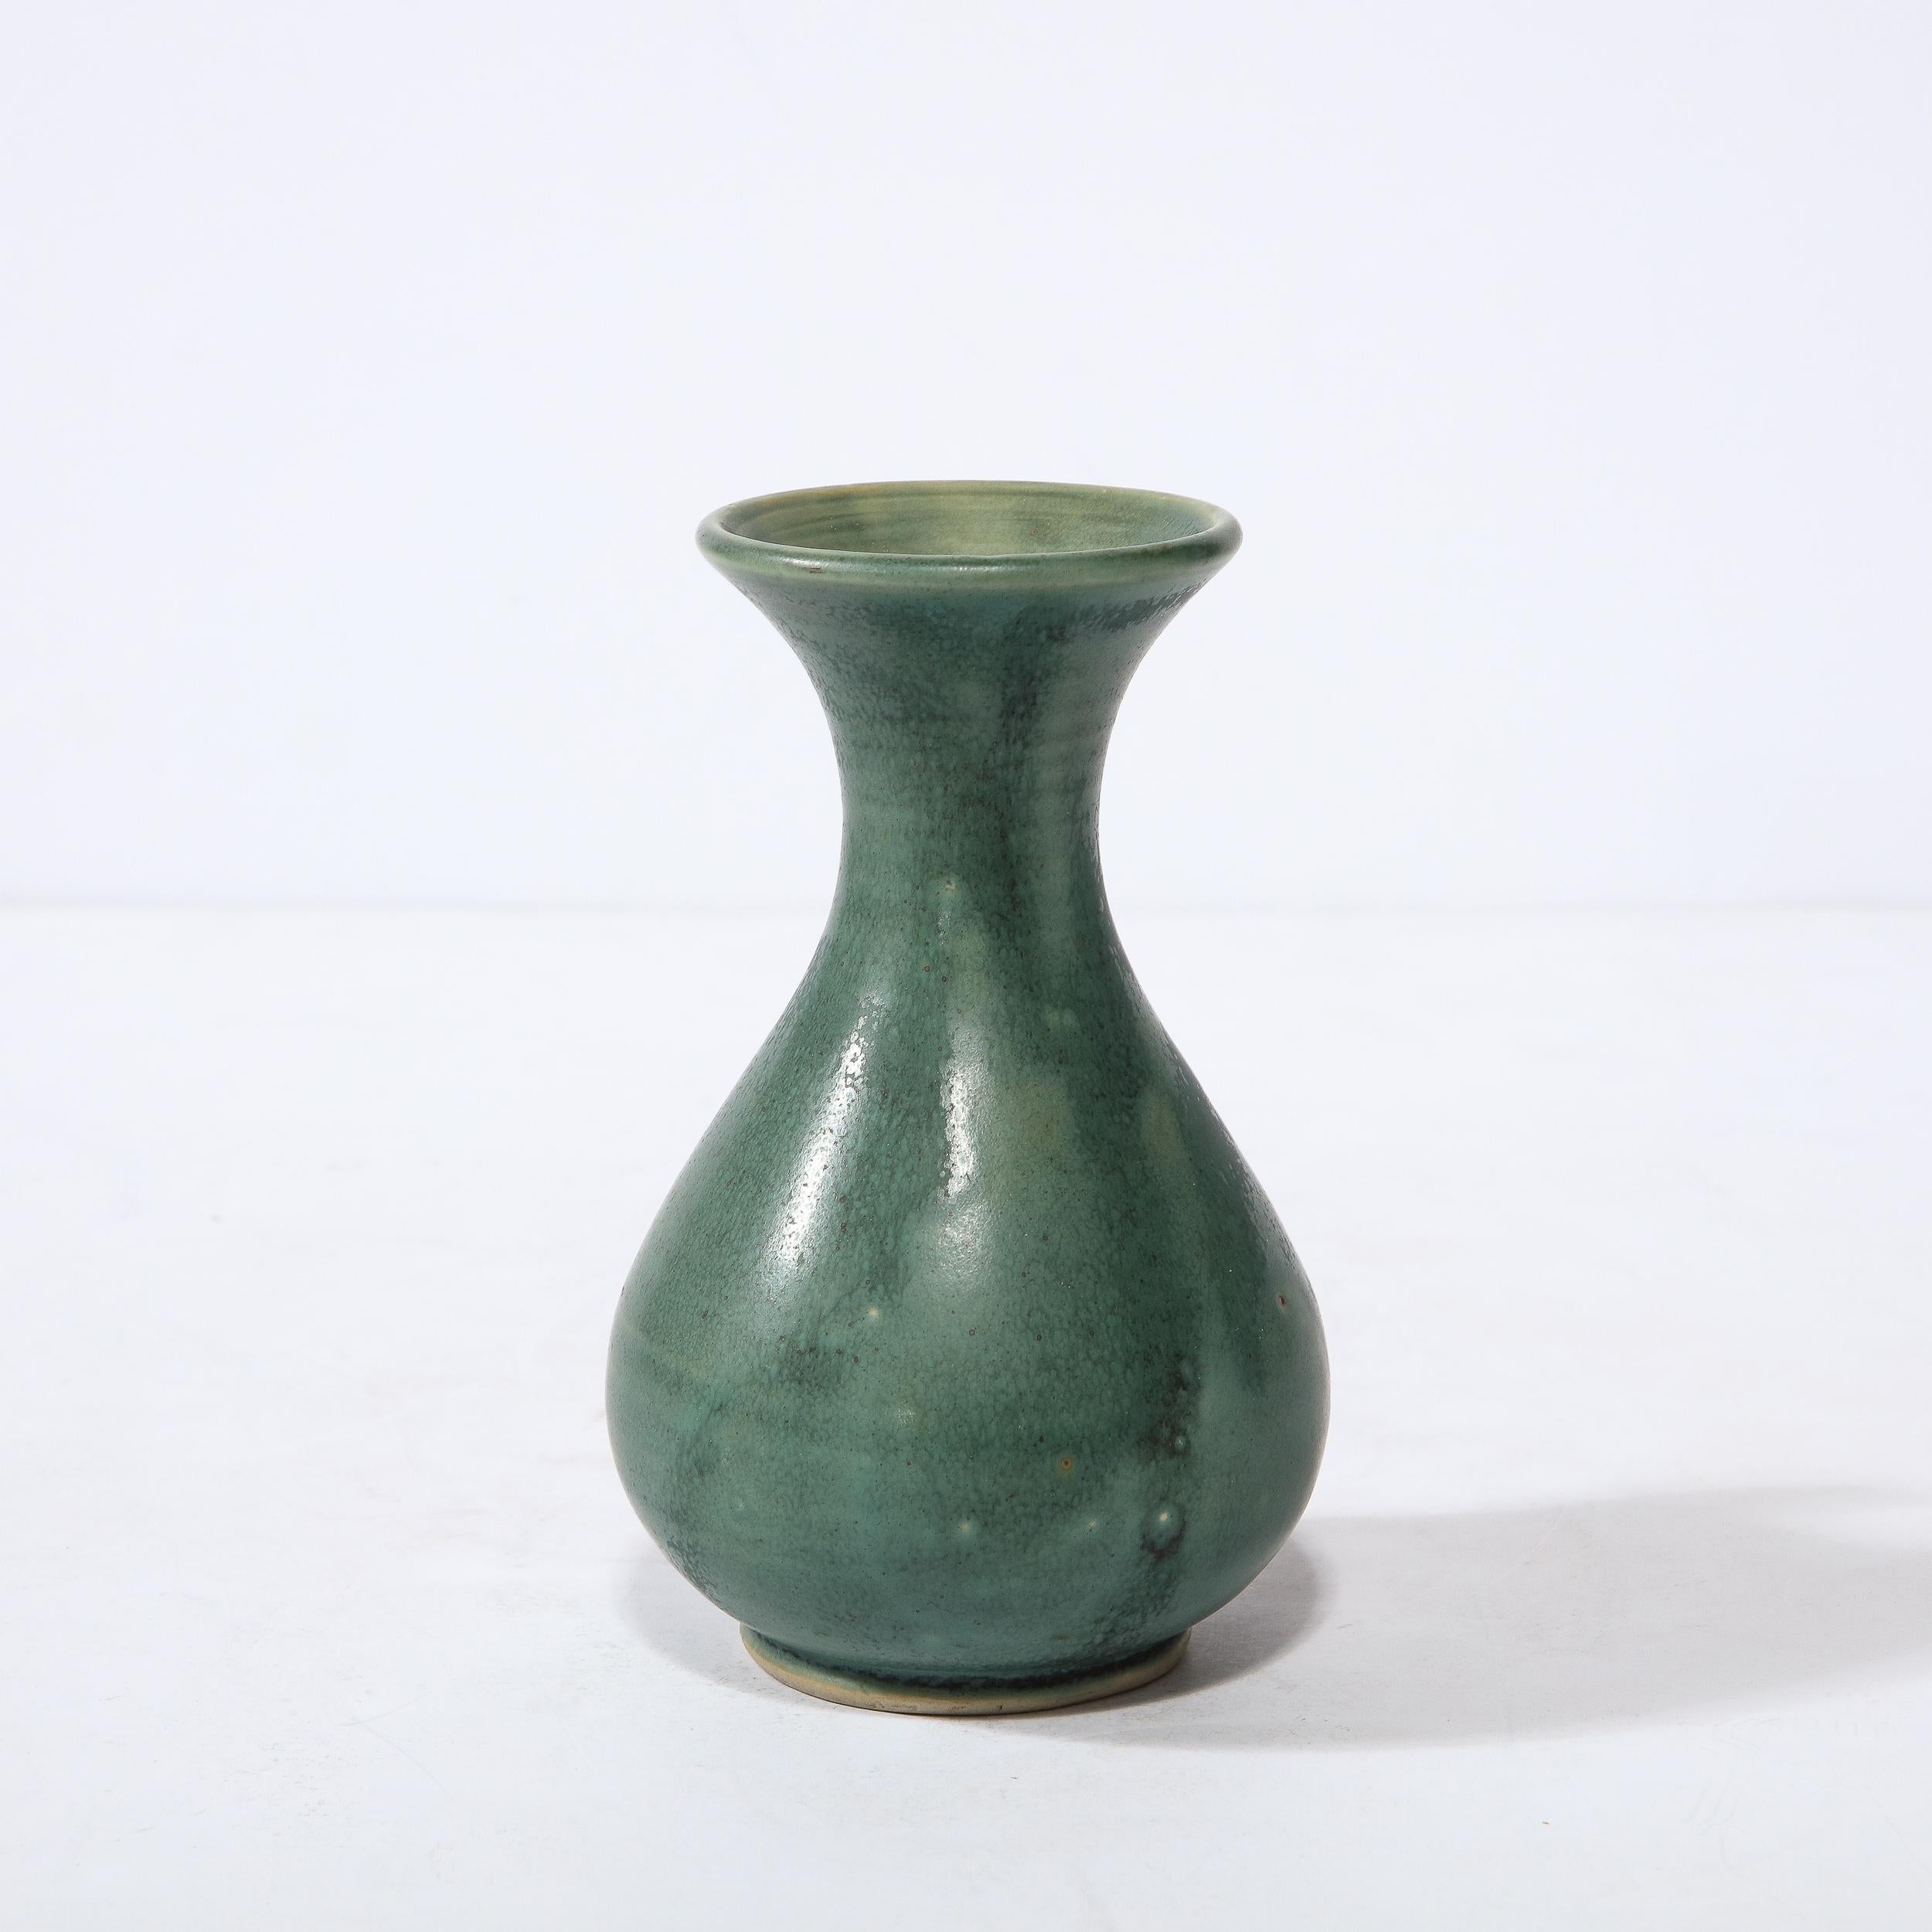 20th Century Modernist Sculptural Muted Jade Glazed Ceramic Vase with Frog Motif in Relief For Sale